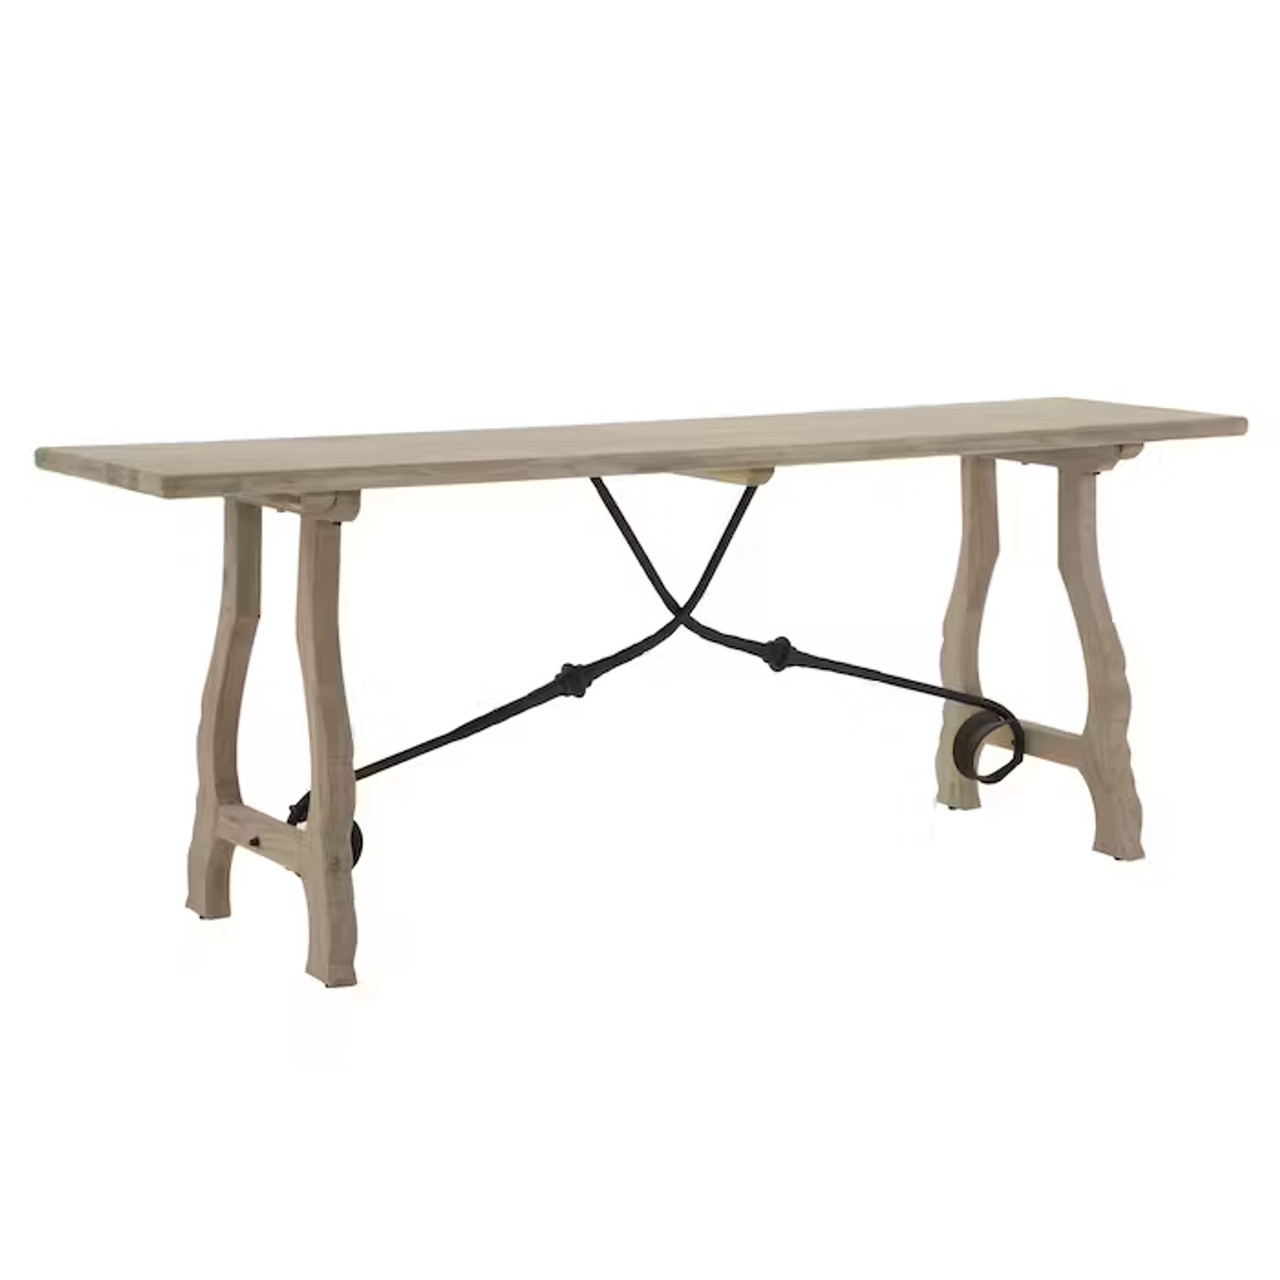 Brutus Console Table